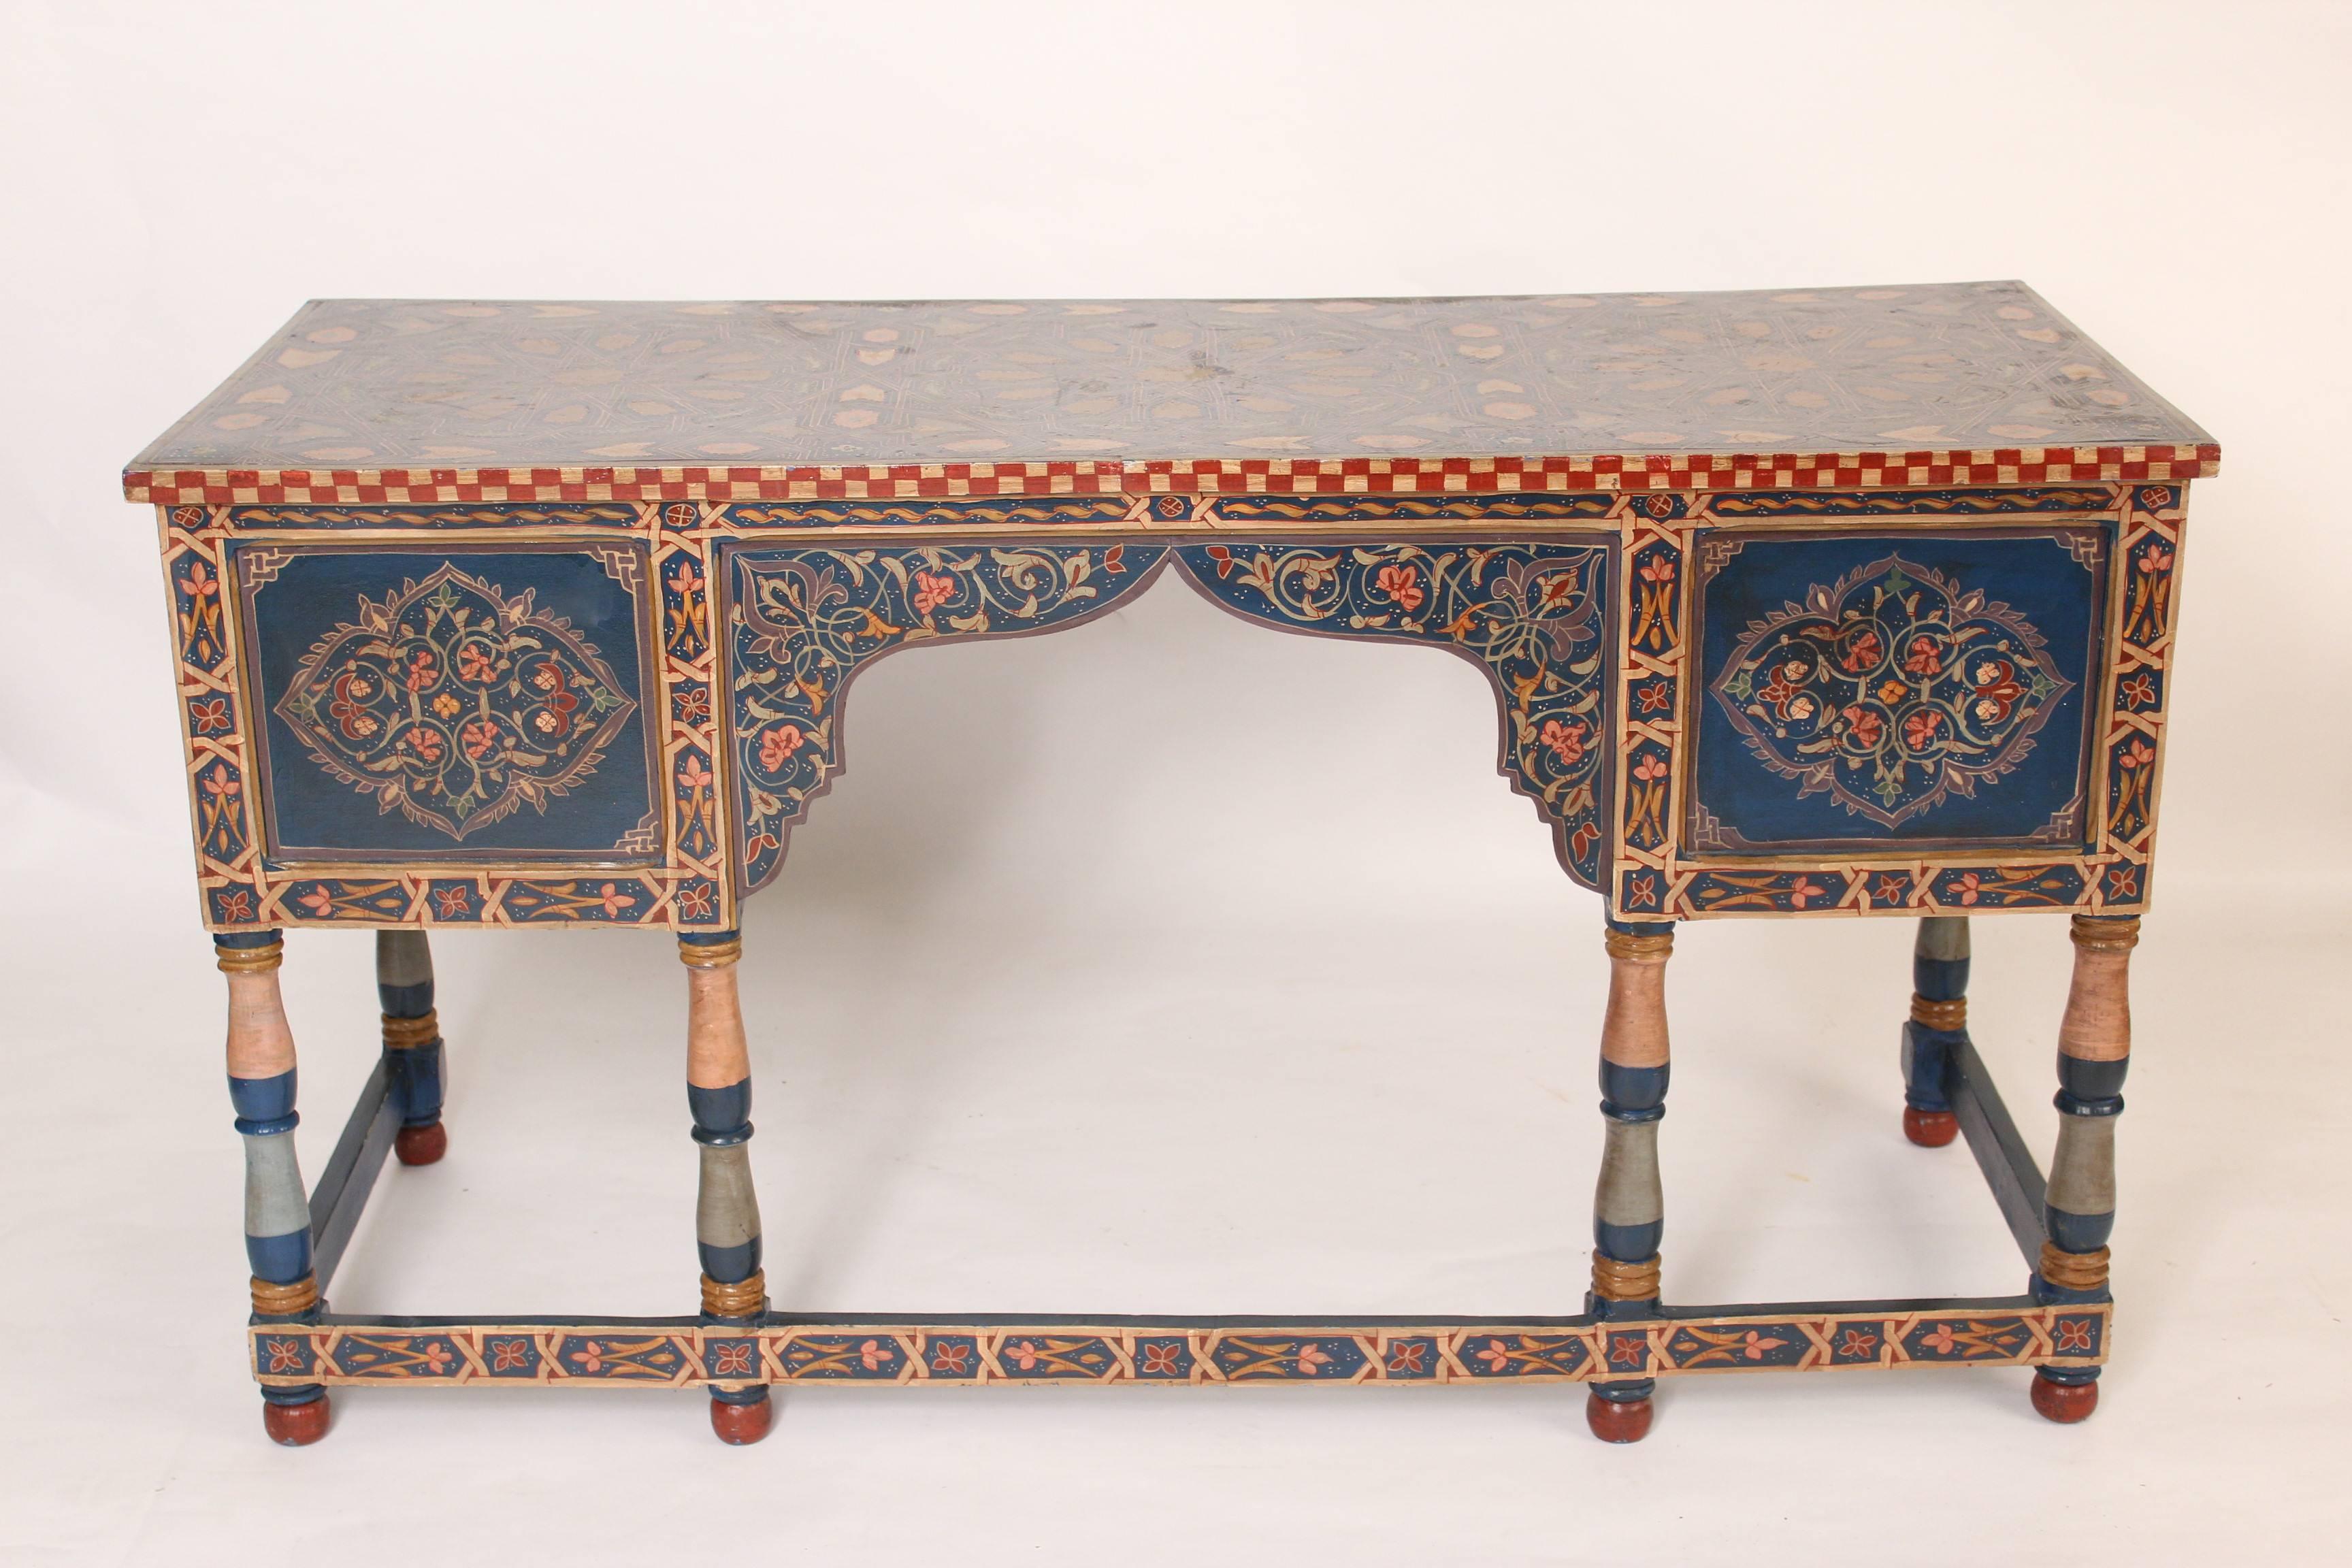 Unknown Colorful Moroccan Style Knee Hole Desk